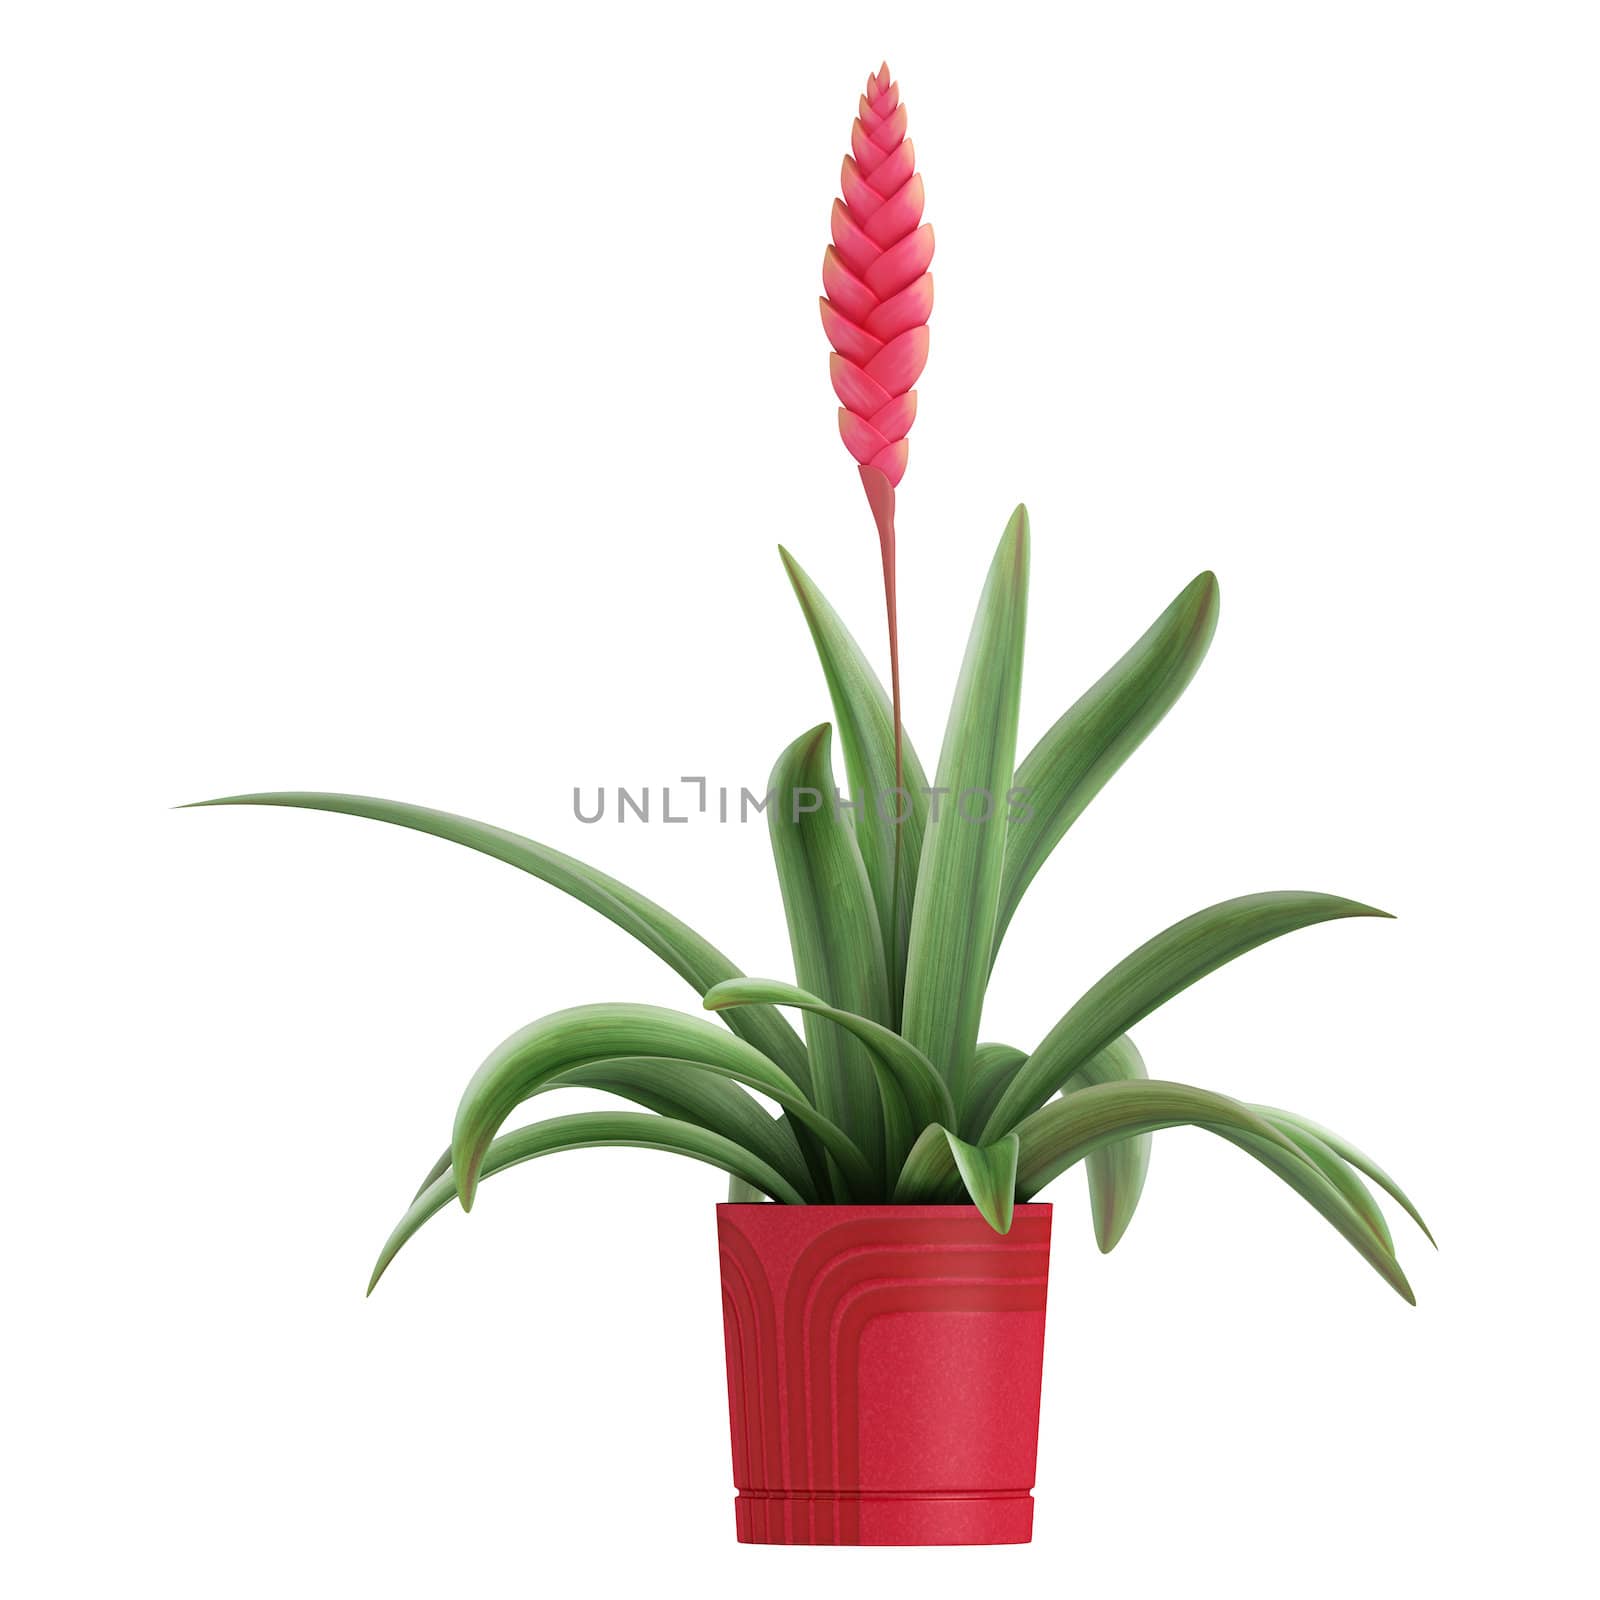 Flowering pink vriesia, a member of the bromeliad family, potted up in a container as an indoor houseplant isolated on white